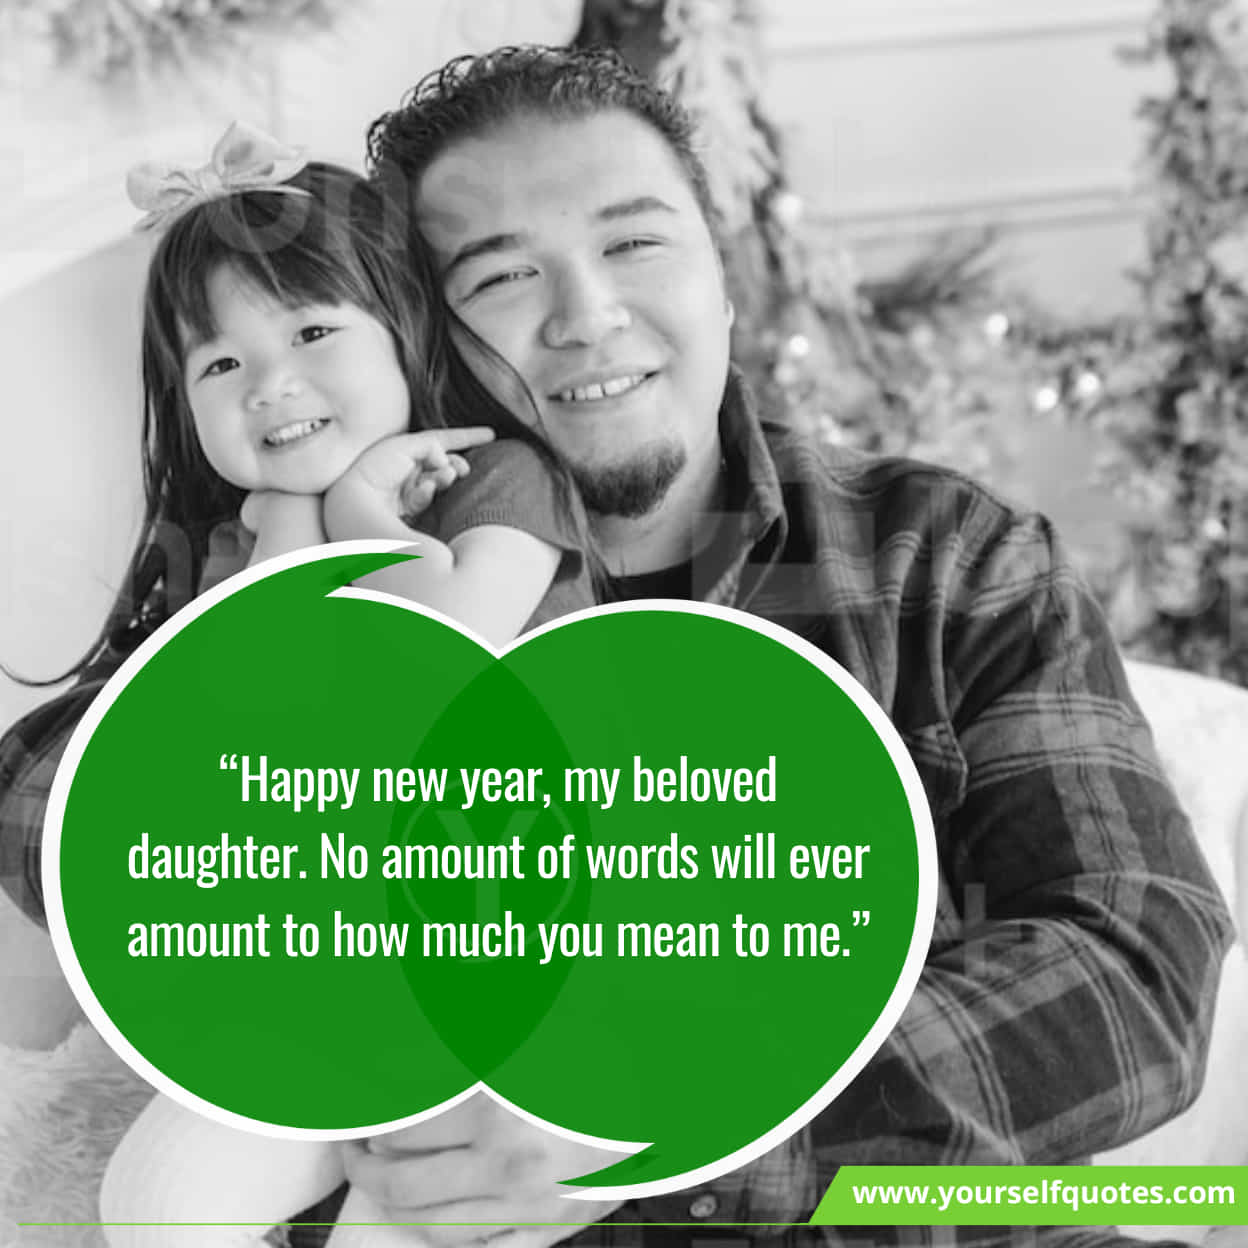 Inspiring Happy New Year Wishes For Daughter